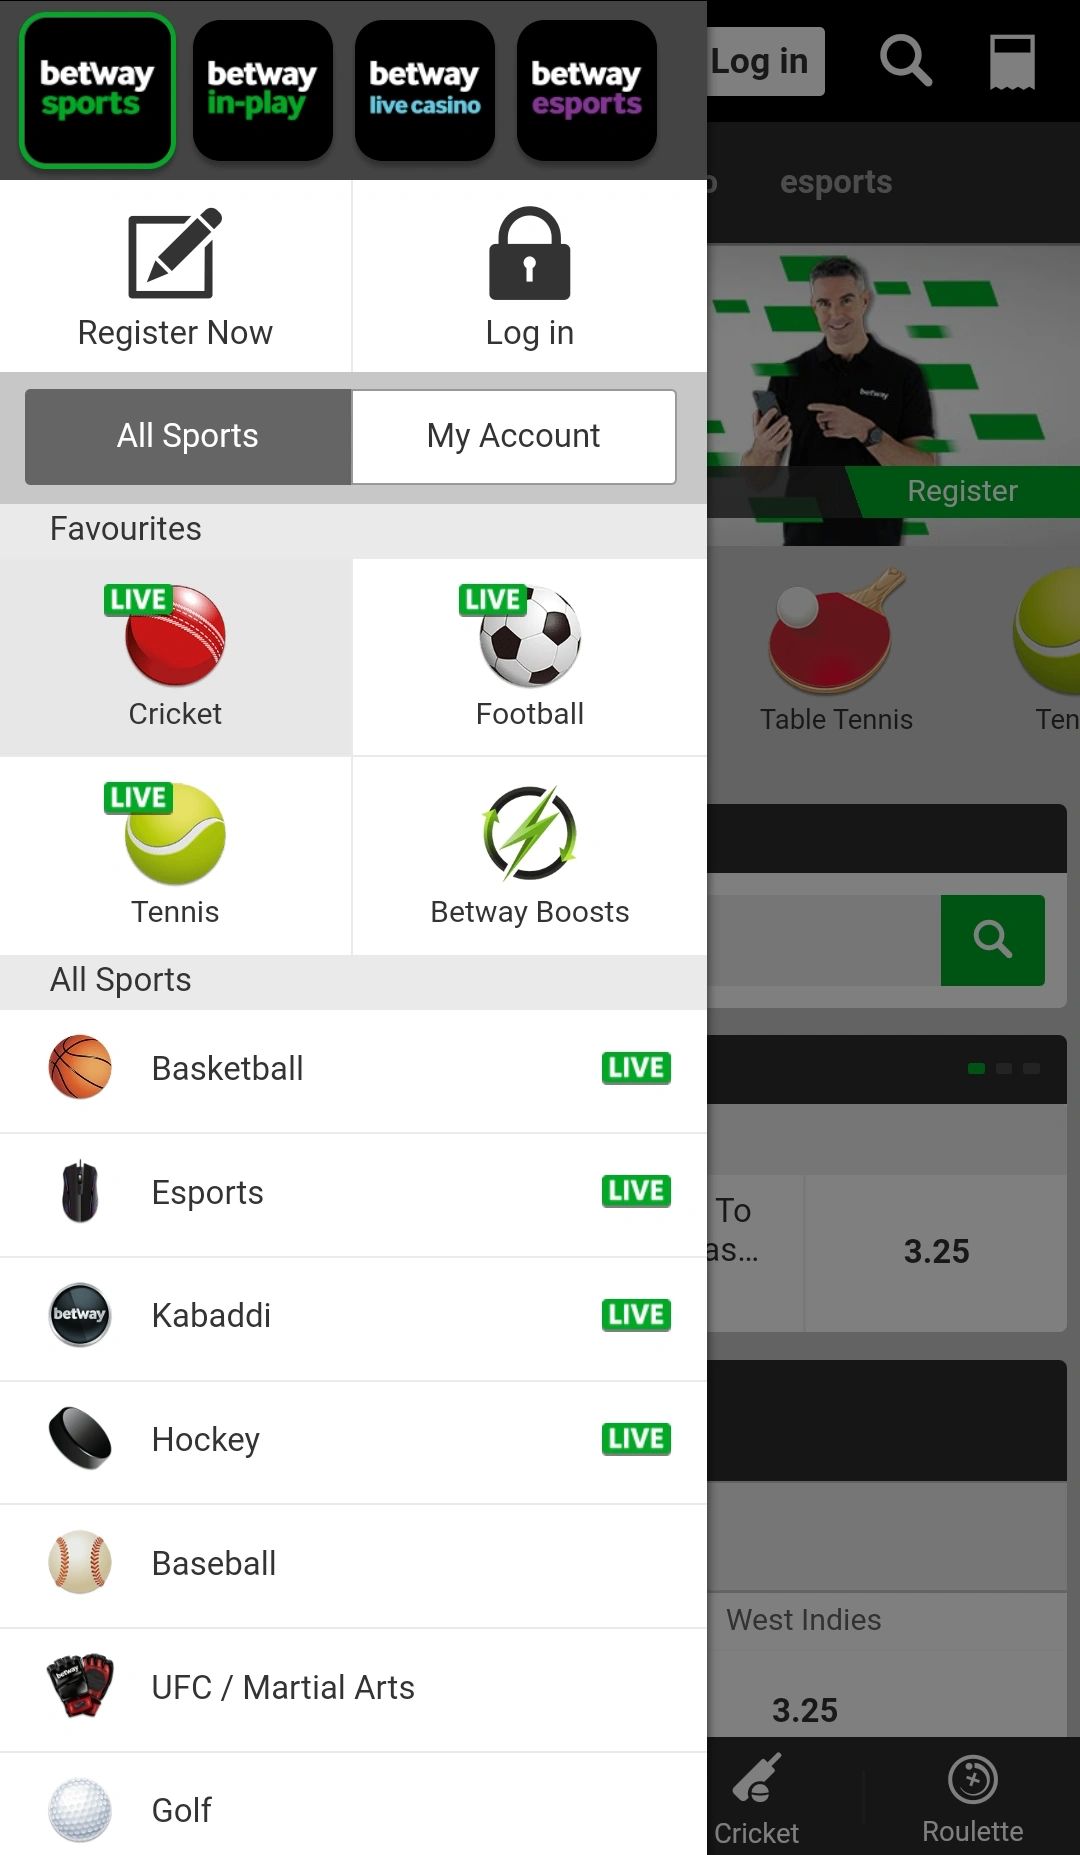 Learn Exactly How I Improved betway betting In 2 Days